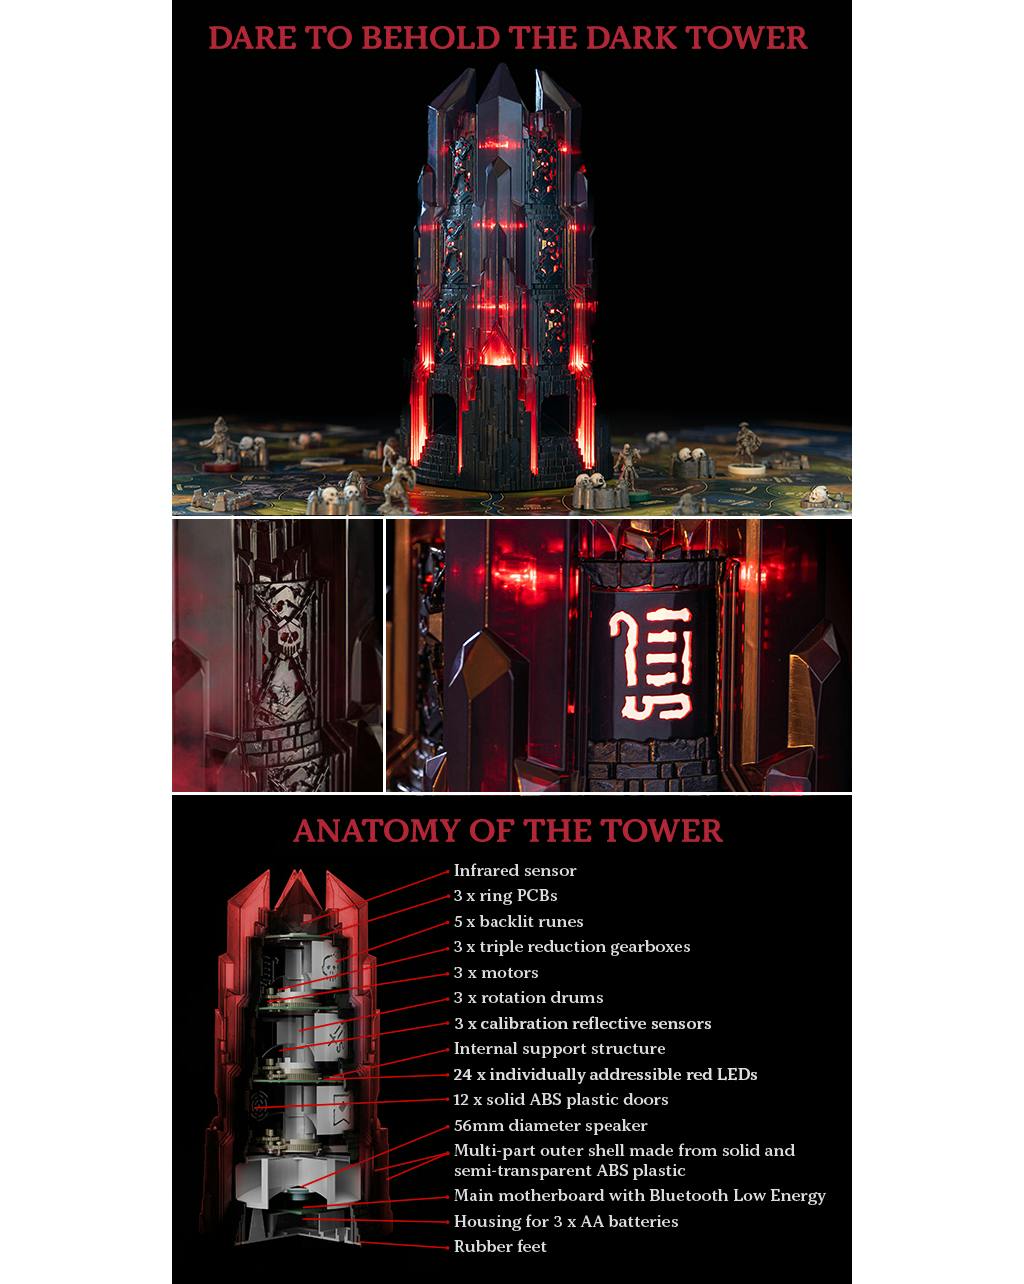 tower detail image with an anatomy of the tower diagram showcasing the details and features of the tower.